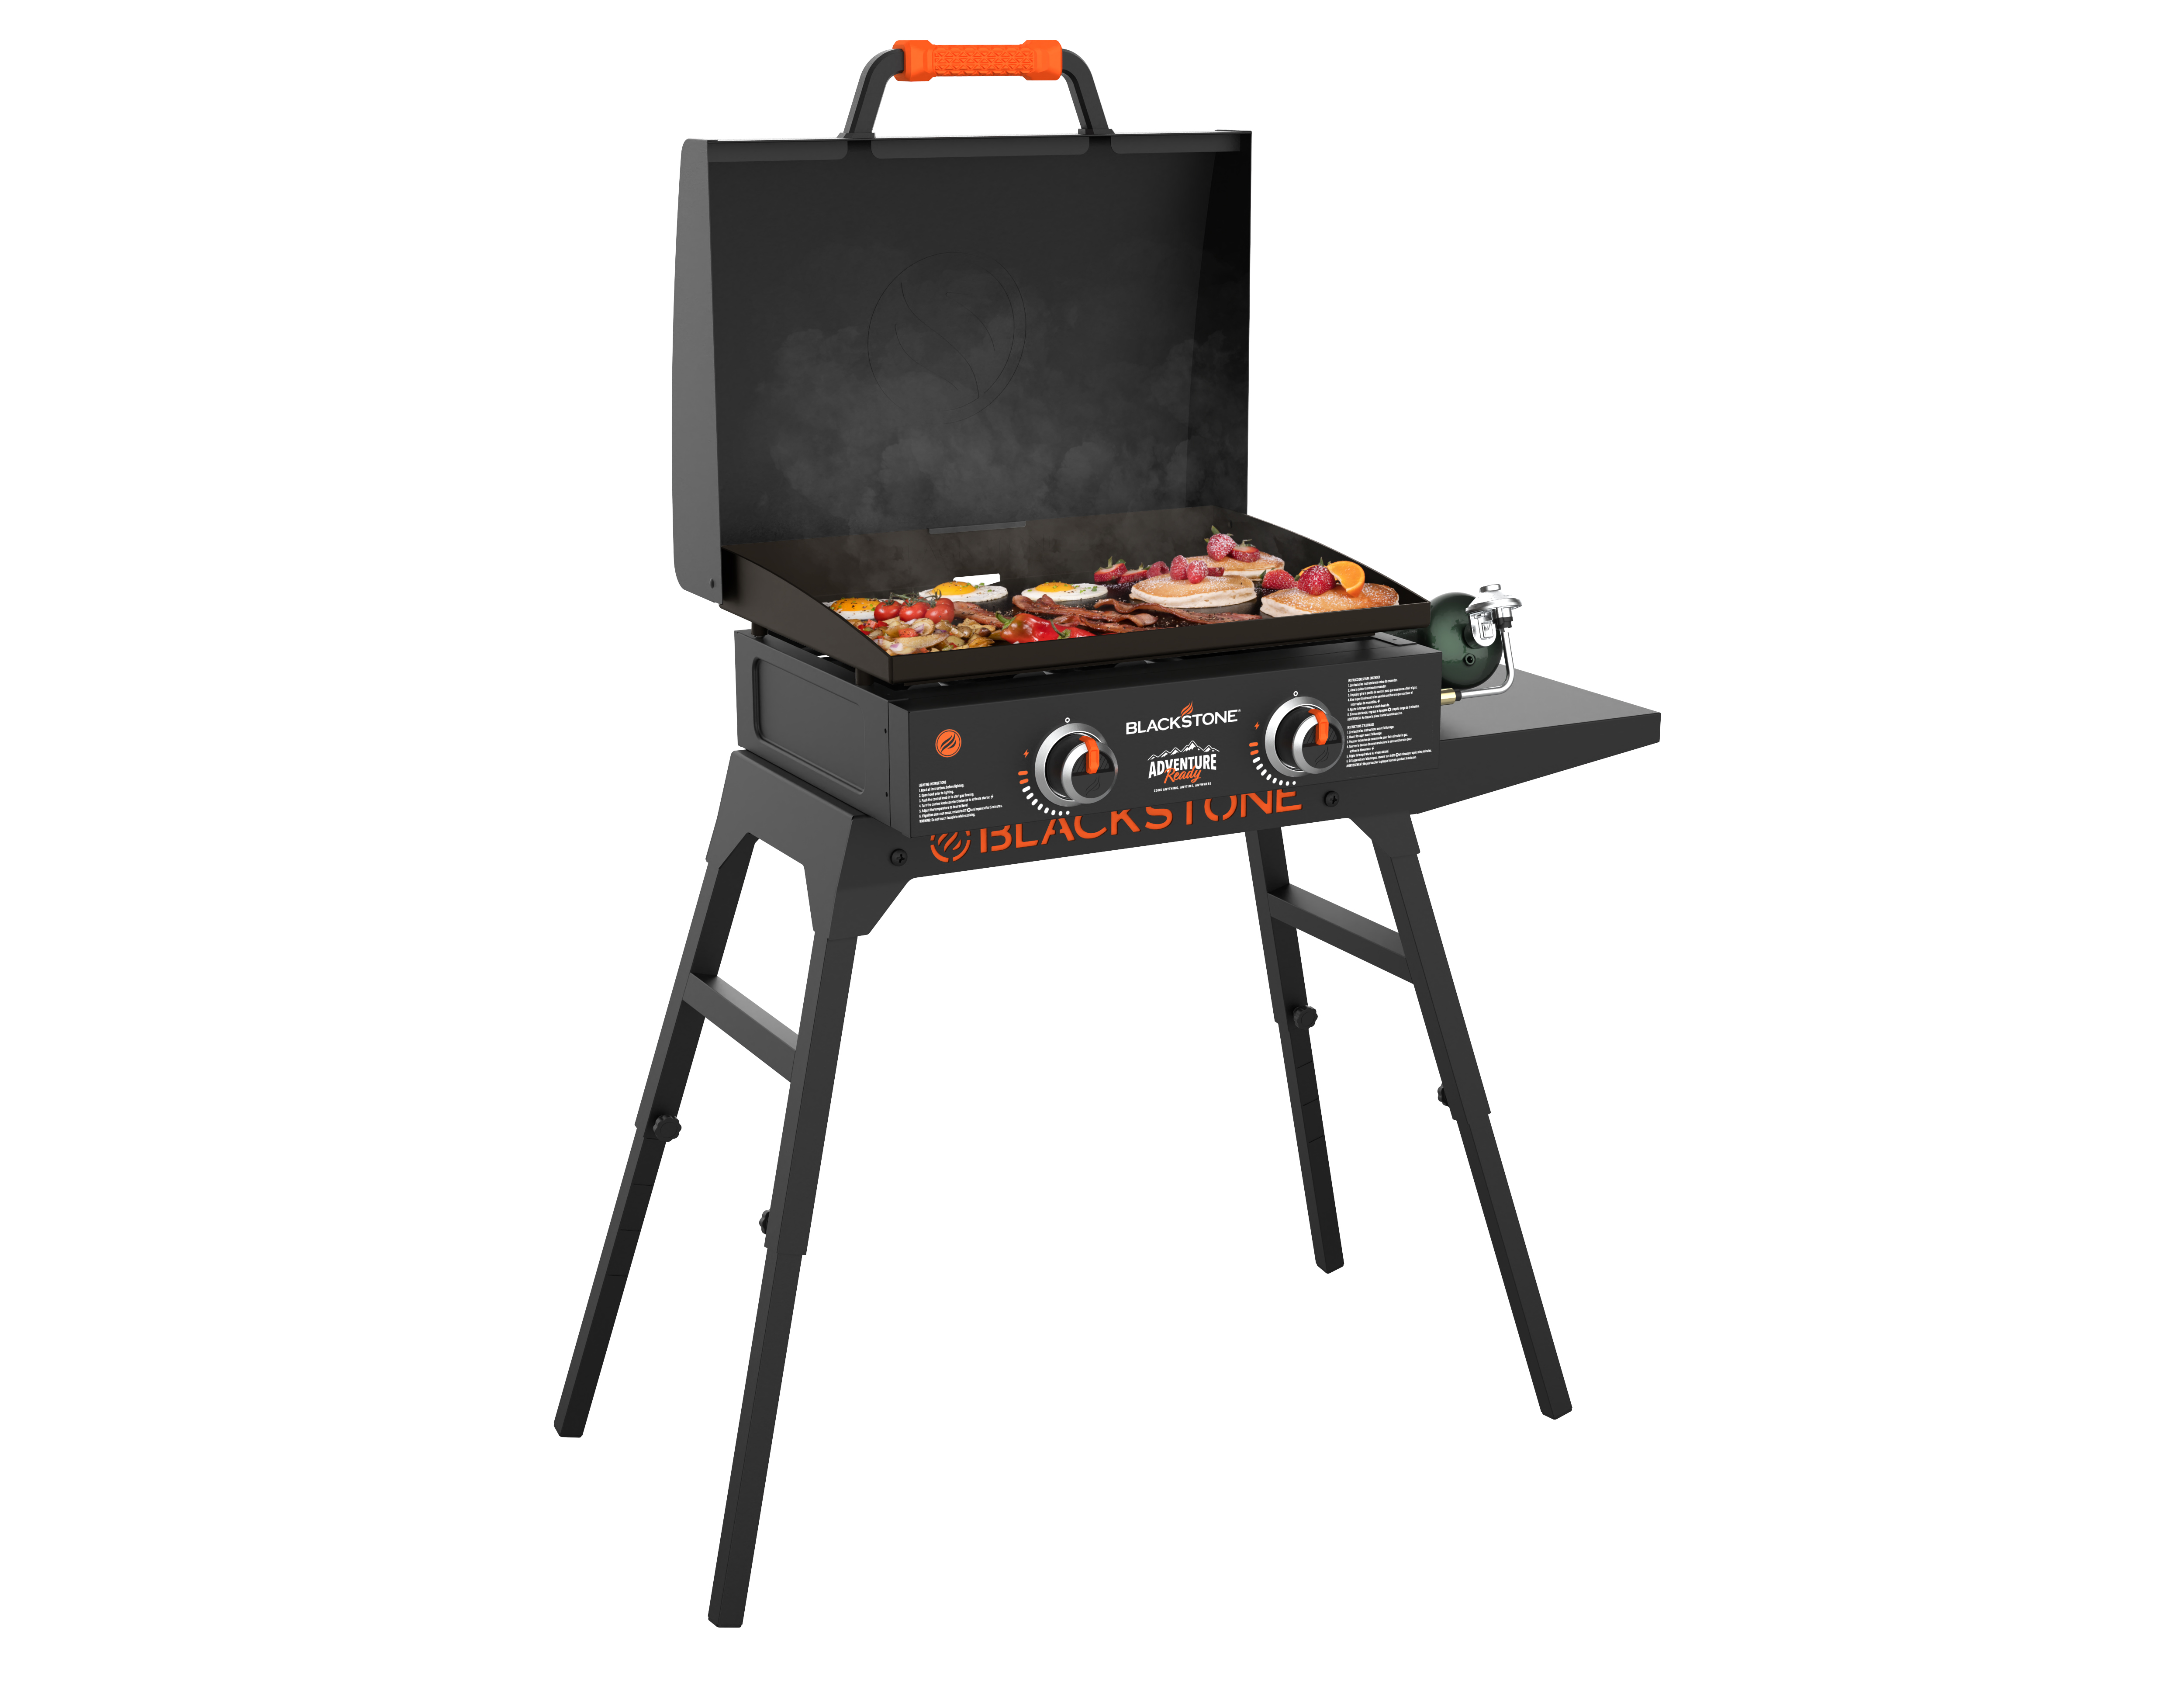 Blackstone Adventure Ready 22" Griddle with Stand and Adapter Hose - Walmart.com $187.00